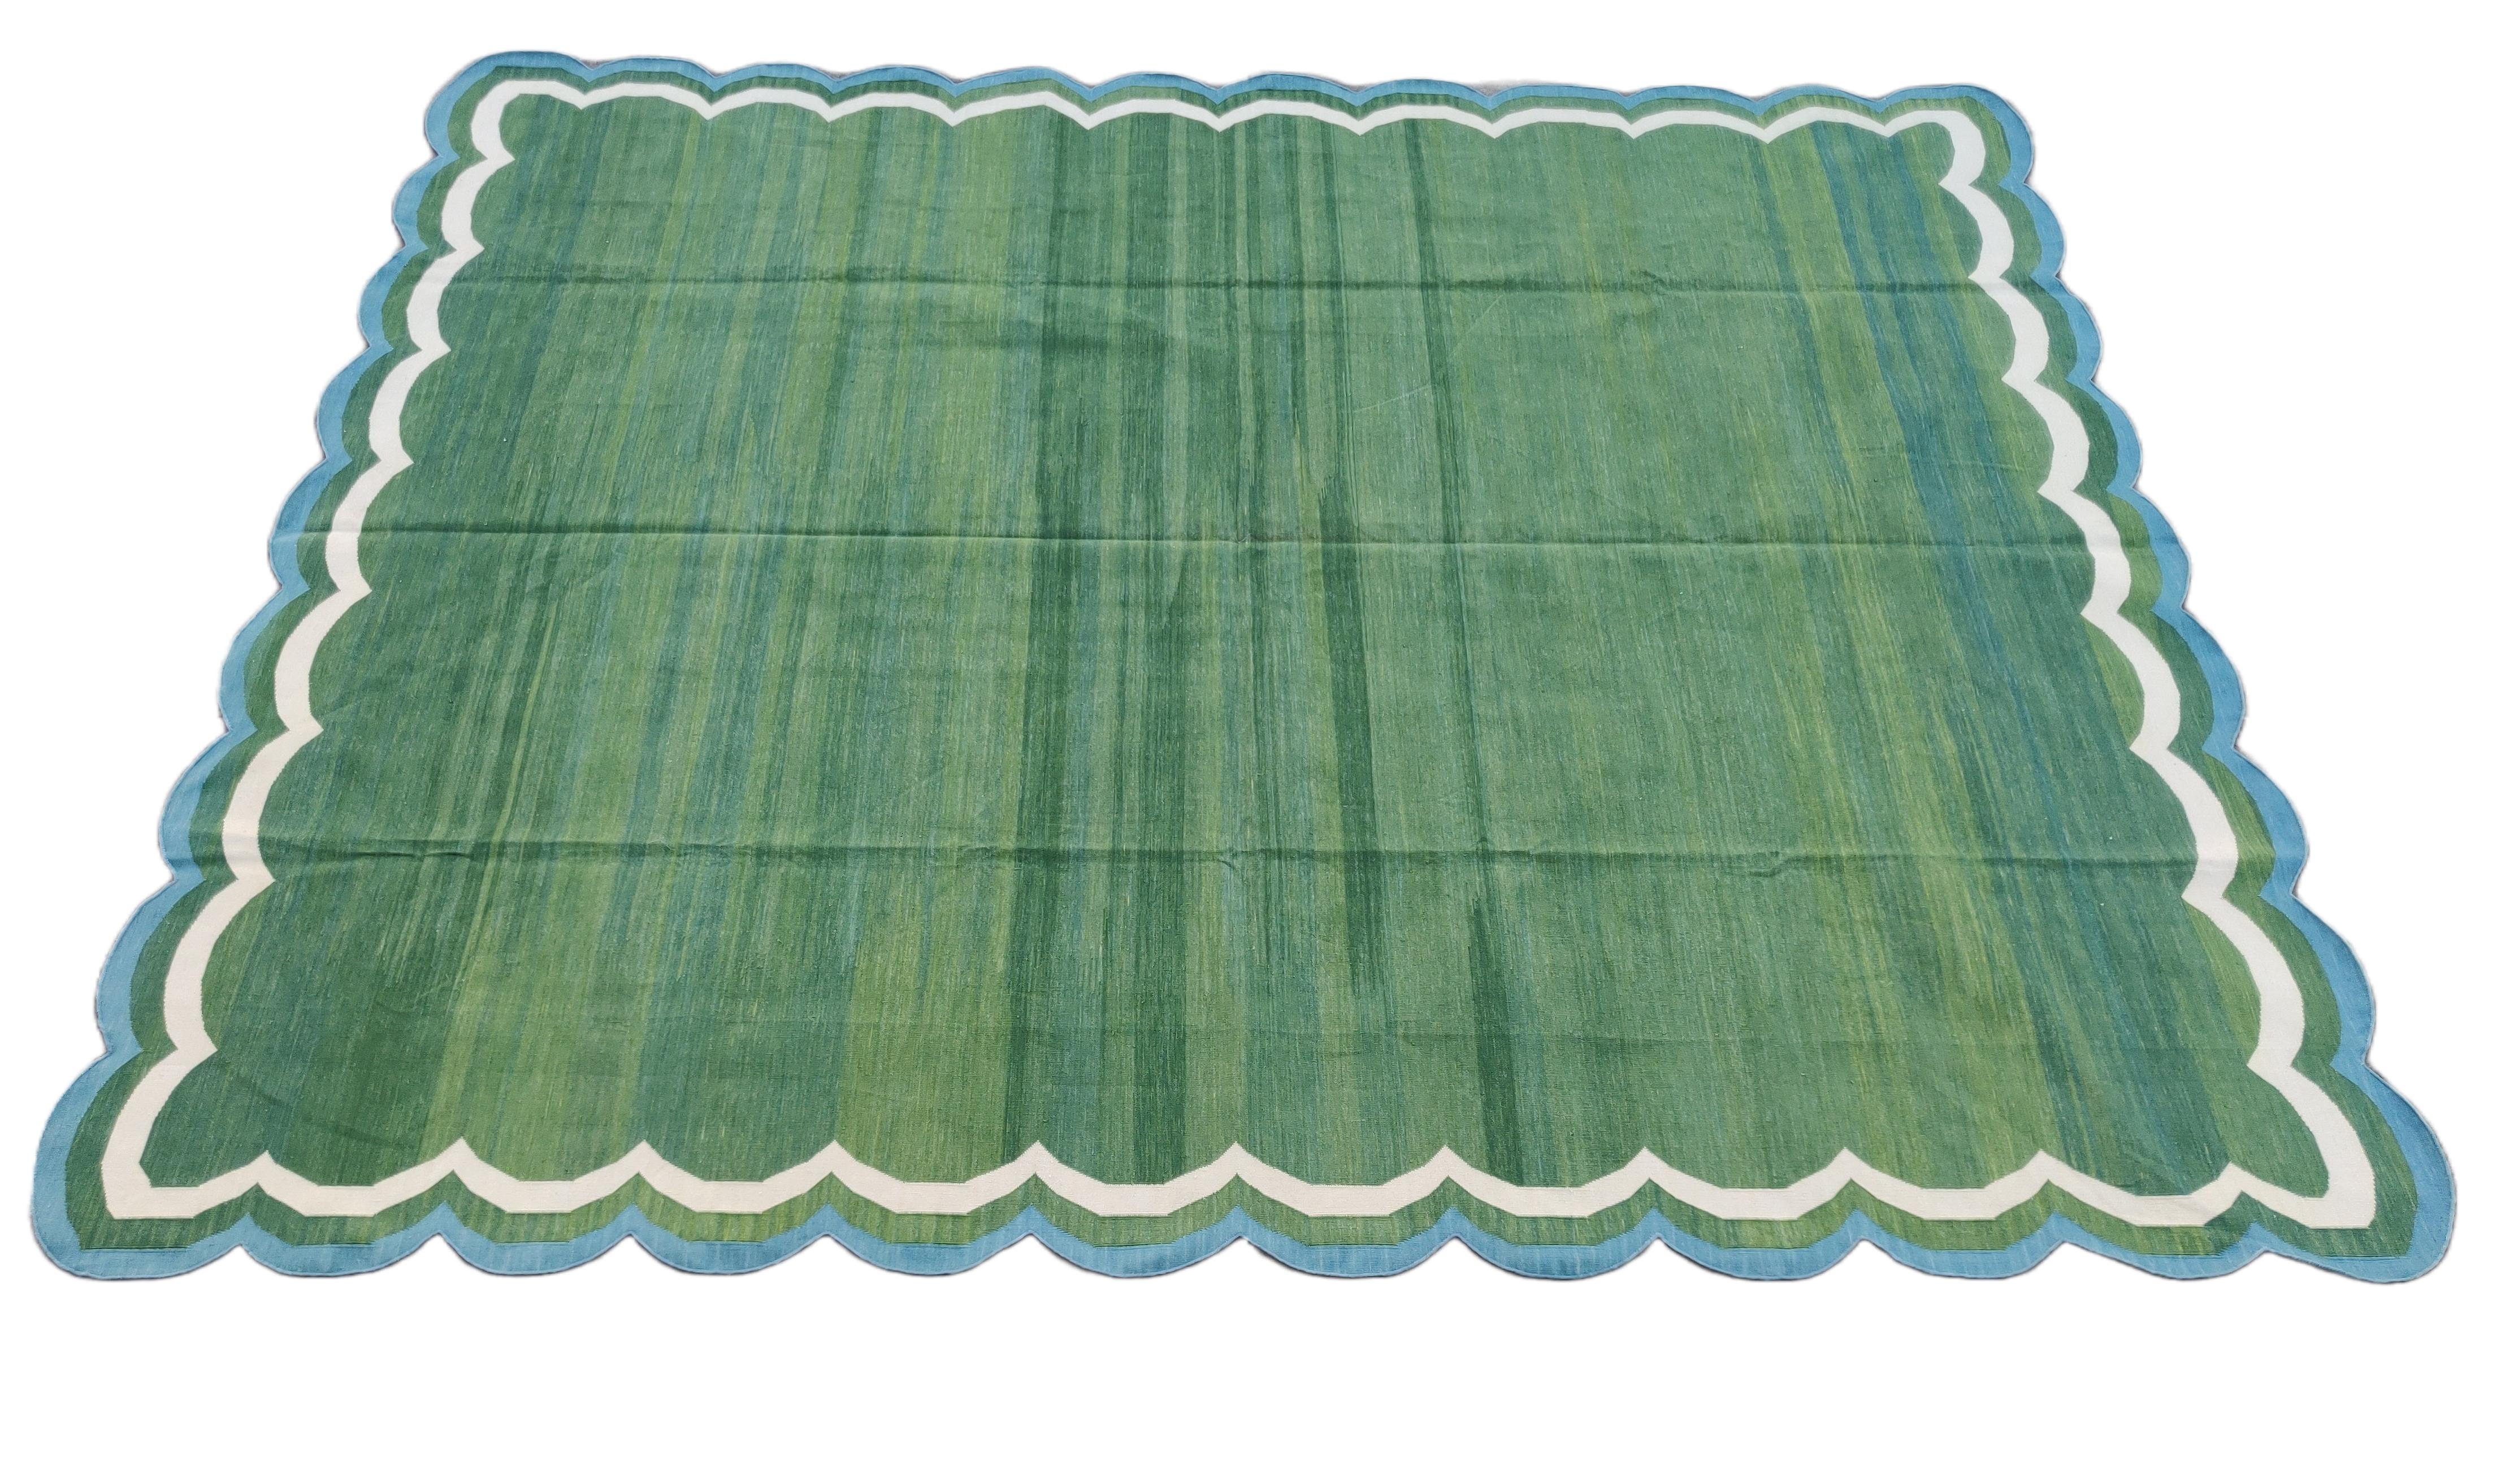 Cotton Vegetable Dyed Forest Green And Blue Scalloped Striped Rug-9'x12'
These special flat-weave dhurries are hand-woven with 15 ply 100% cotton yarn. Due to the special manufacturing techniques used to create our rugs, the size and color of each